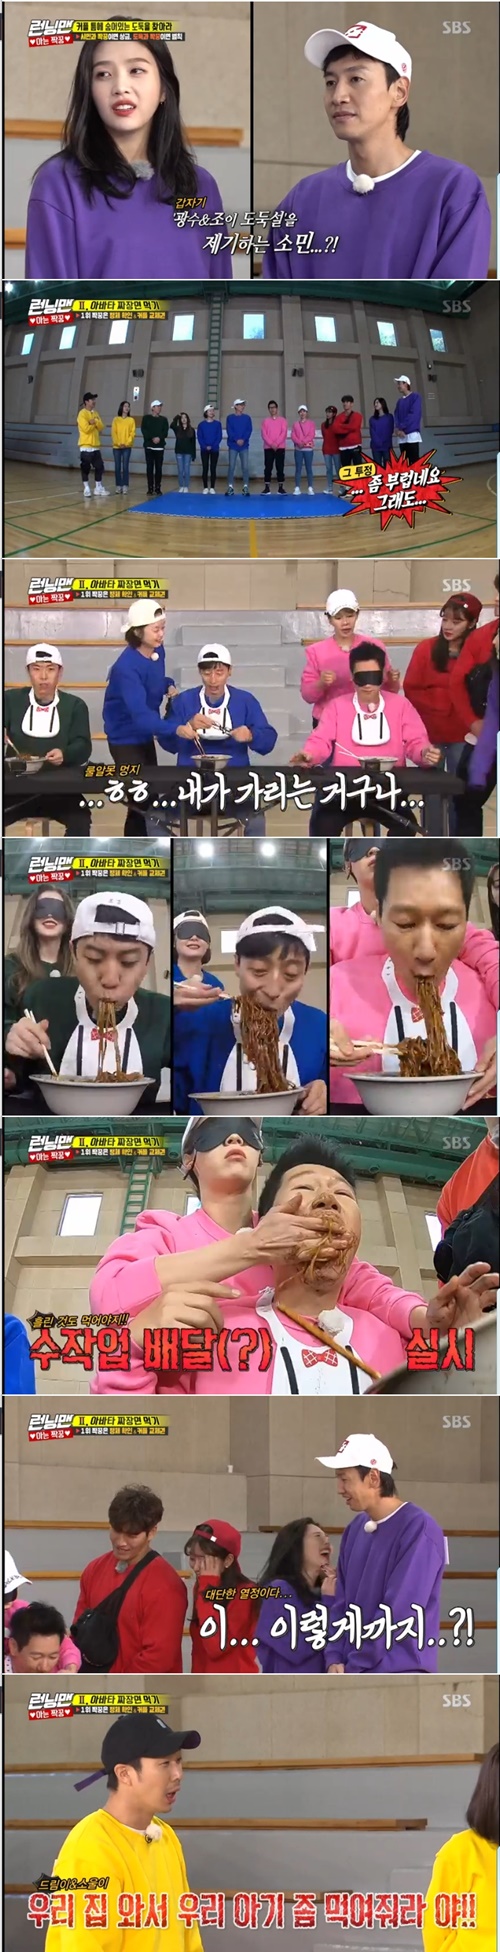 Running Man Song Ji-hyo has been dirty for the first place in the game.On the SBS entertainment program Running Man, which was broadcast on the afternoon of the 25th, a game was held to find a thief.Jeon So-min suddenly said, Lee Kwang-soo and Joy are thieves. I heard Joy tell Lee Kwang-soo, What are we doing?Then, the game Eat Avatar Jajangmyeon was unfolded, which was the way male members would eat when female members covered their eyes and fed them with chopsticks.The number one mate was able to identify himself and get a couple replacement rights.The two couples, Yoo Jae-Suk and Jeon So-min, were the first to eat; followed by Ji Suk-jin and Song Ji-hyo, who finished.But there was a lot of spreading on the floor. Song Ji-hyo groped the table and picked it up by hand and forced it into Ji Suk-jins mouth.Lee Kwang-soo, who watched, admired, Do you do this? Haha said, Come to my house and feed the babies like that.I can not eat rice these days, he laughed.